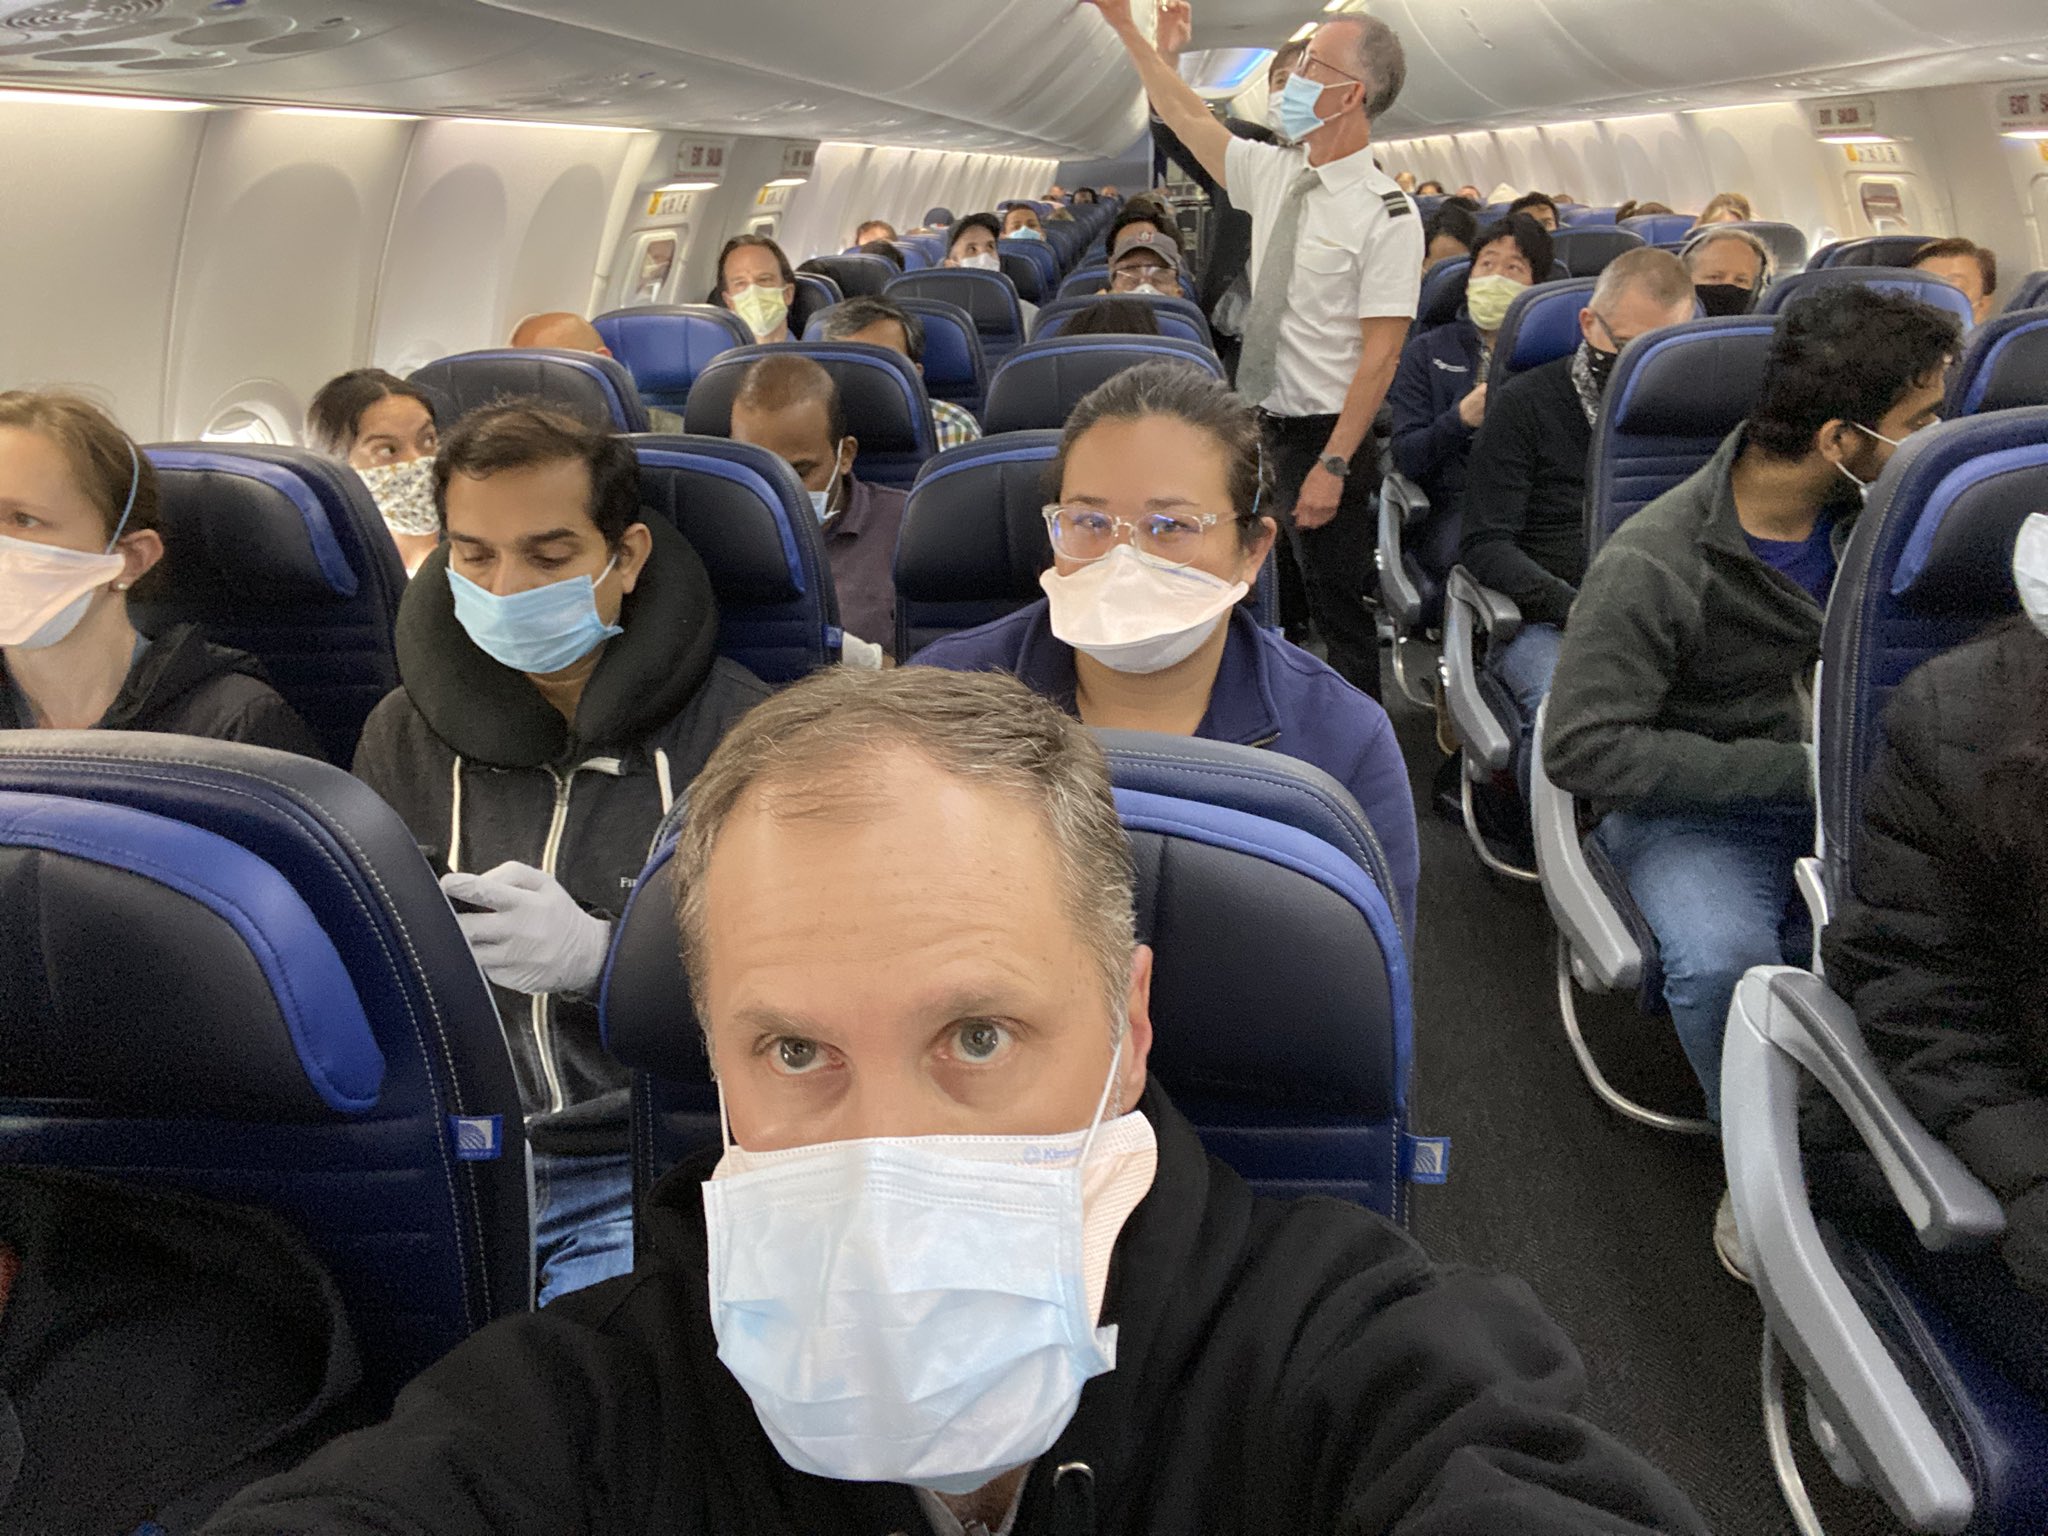 Boarding and Deplaning Can Present Ventilation Challenges